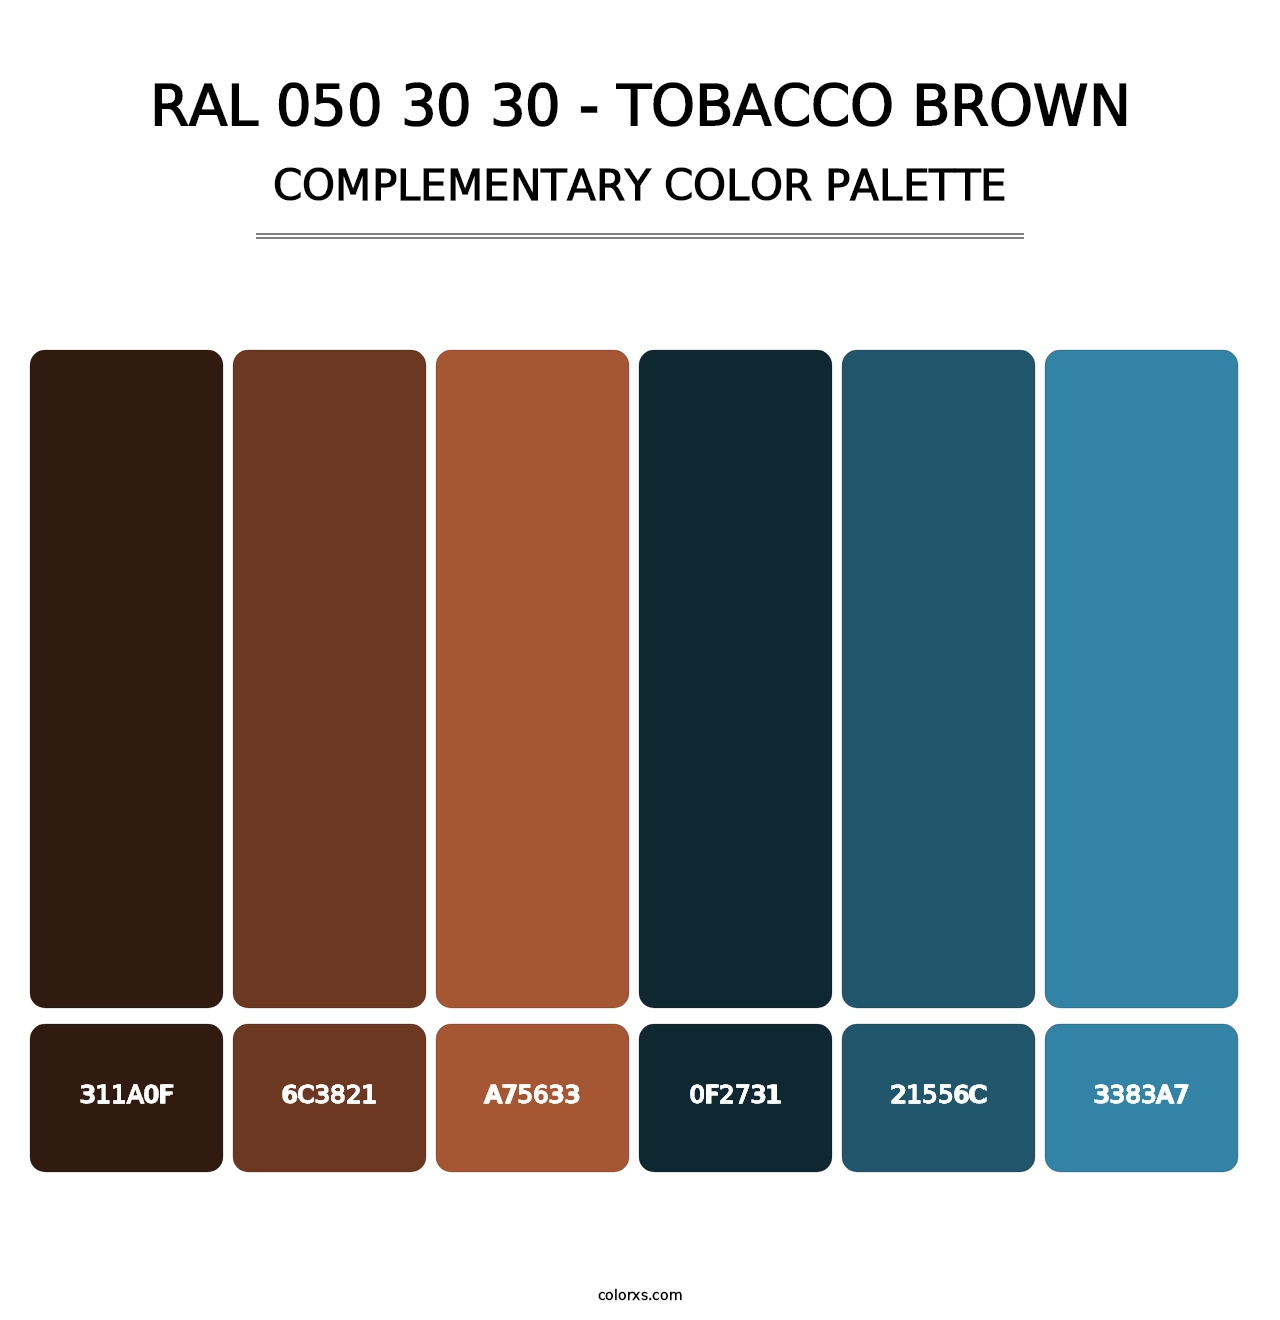 RAL 050 30 30 - Tobacco Brown - Complementary Color Palette